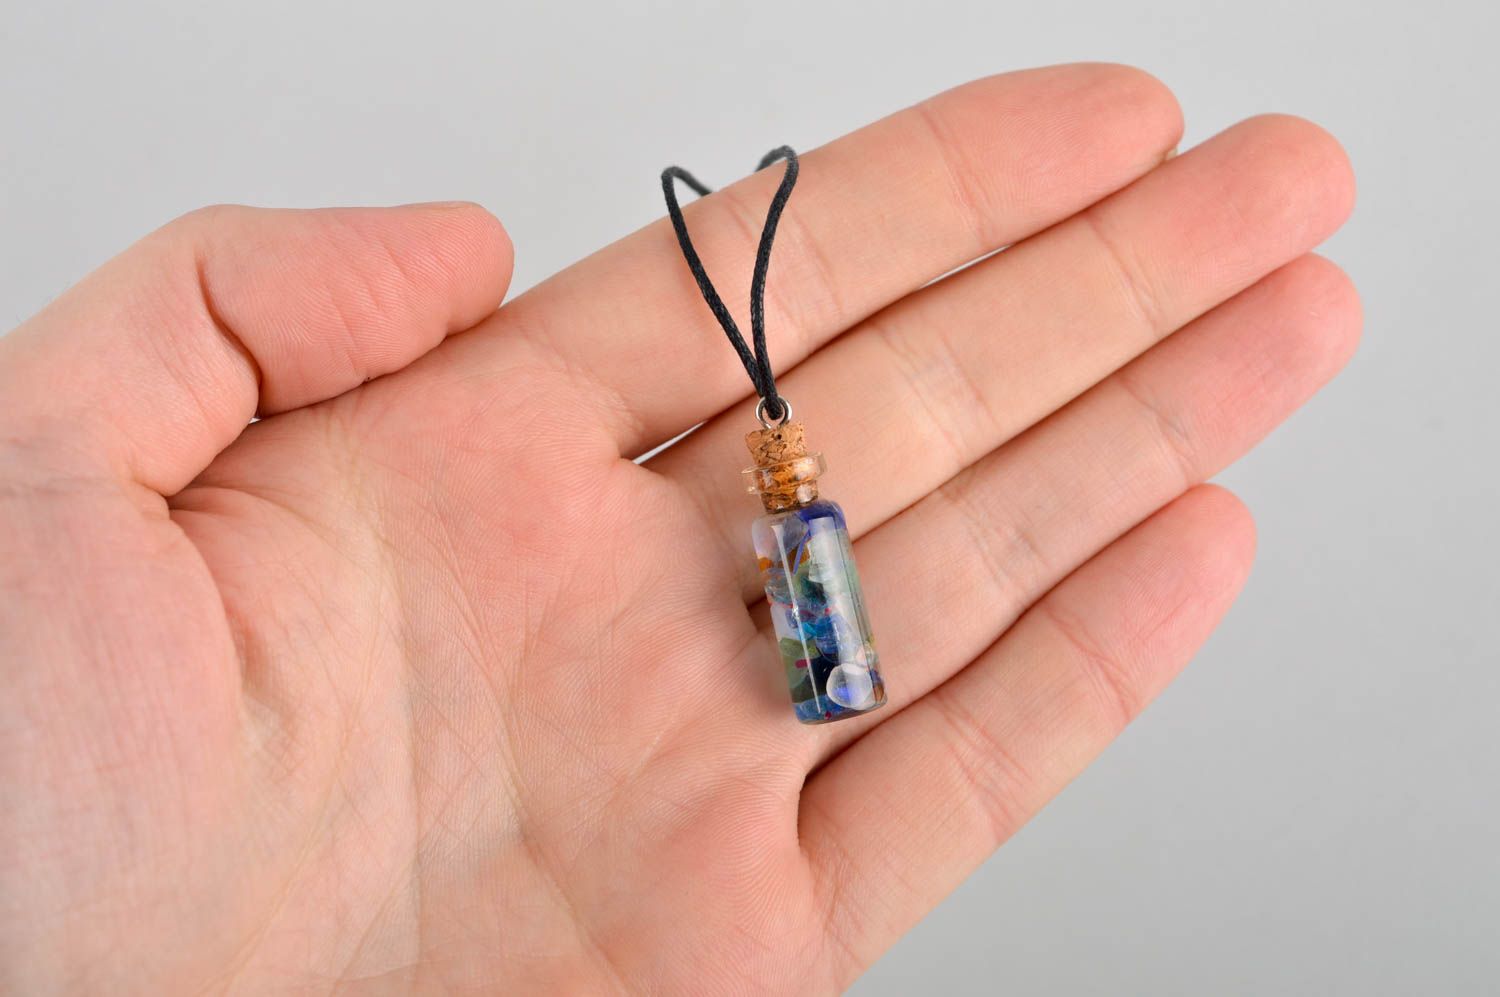 Handmade jewelry glass vial necklace small glass vial pendant gifts for girls photo 5